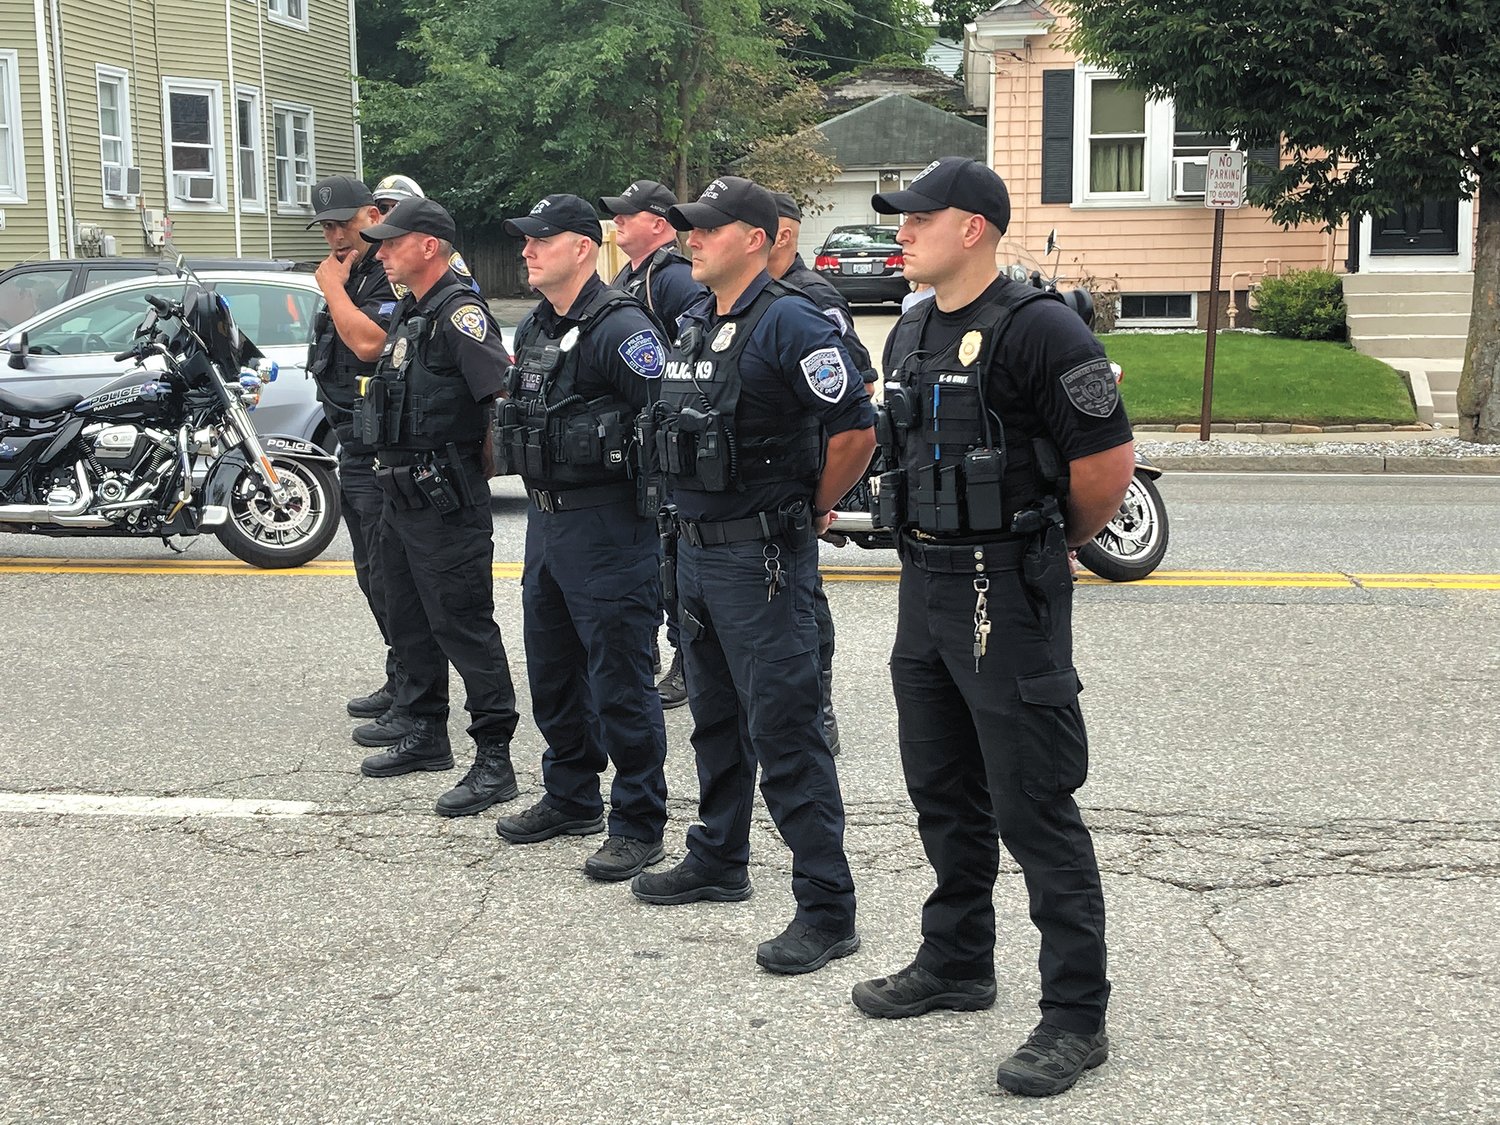 K-9 UNITS: K-9 units from Cranston, Coventry and Woonsocket paid their respects for K-9 Lex outside the Cranston Police Department headquarters on Monday. (Herald photo)